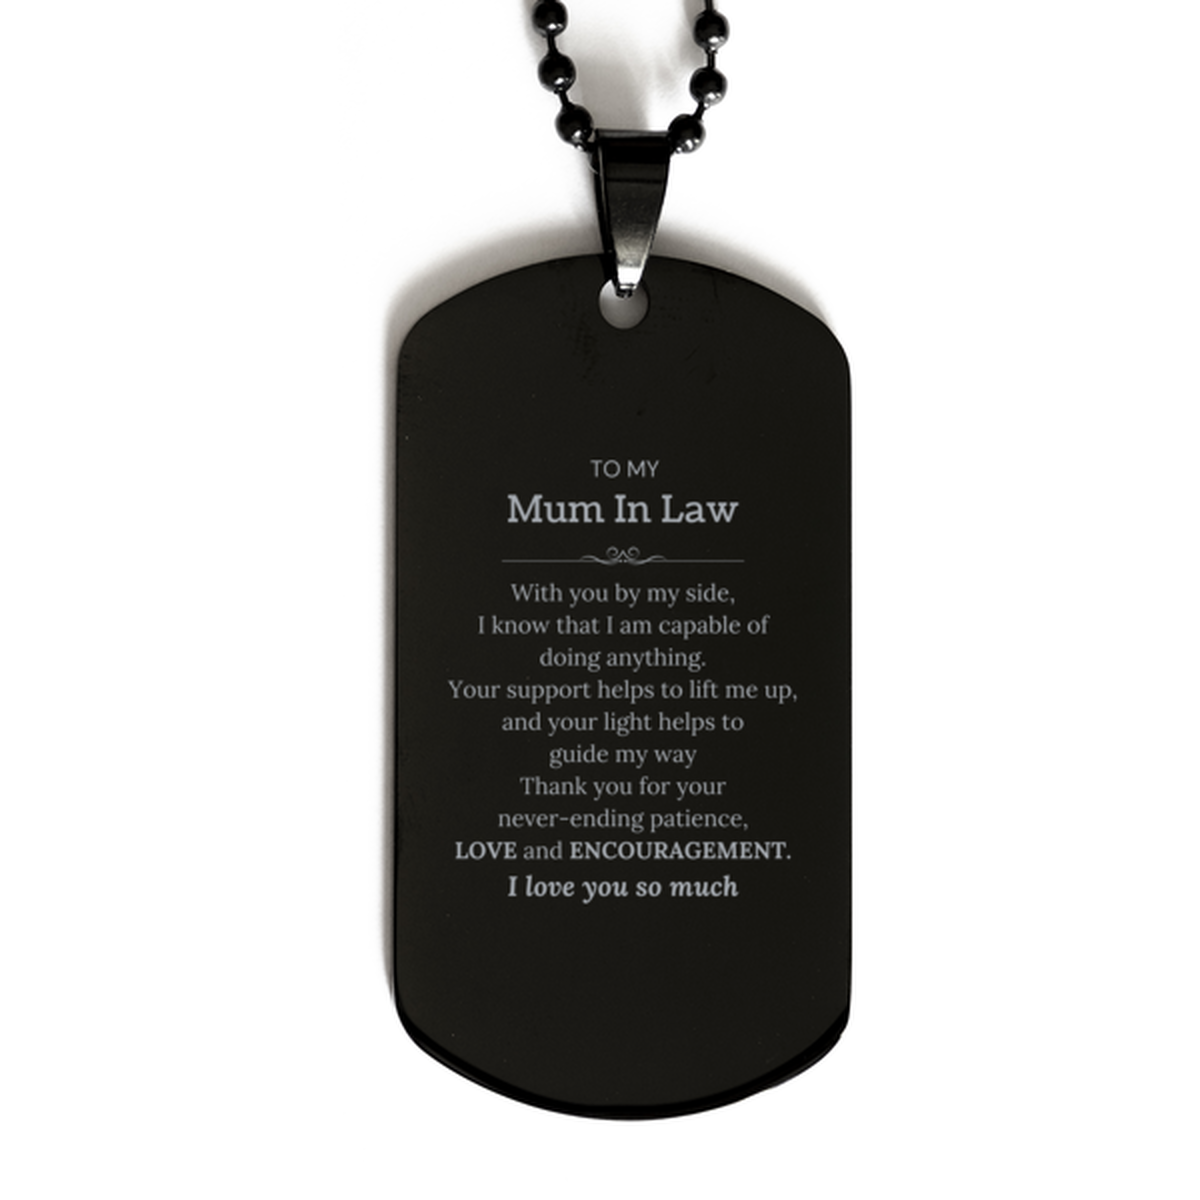 Appreciation Mum In Law  Black Dog Tag Gifts, To My Mum In Law  Birthday Christmas Wedding Keepsake Gifts for Mum In Law  With you by my side, I know that I am capable of doing anything. I love you so much